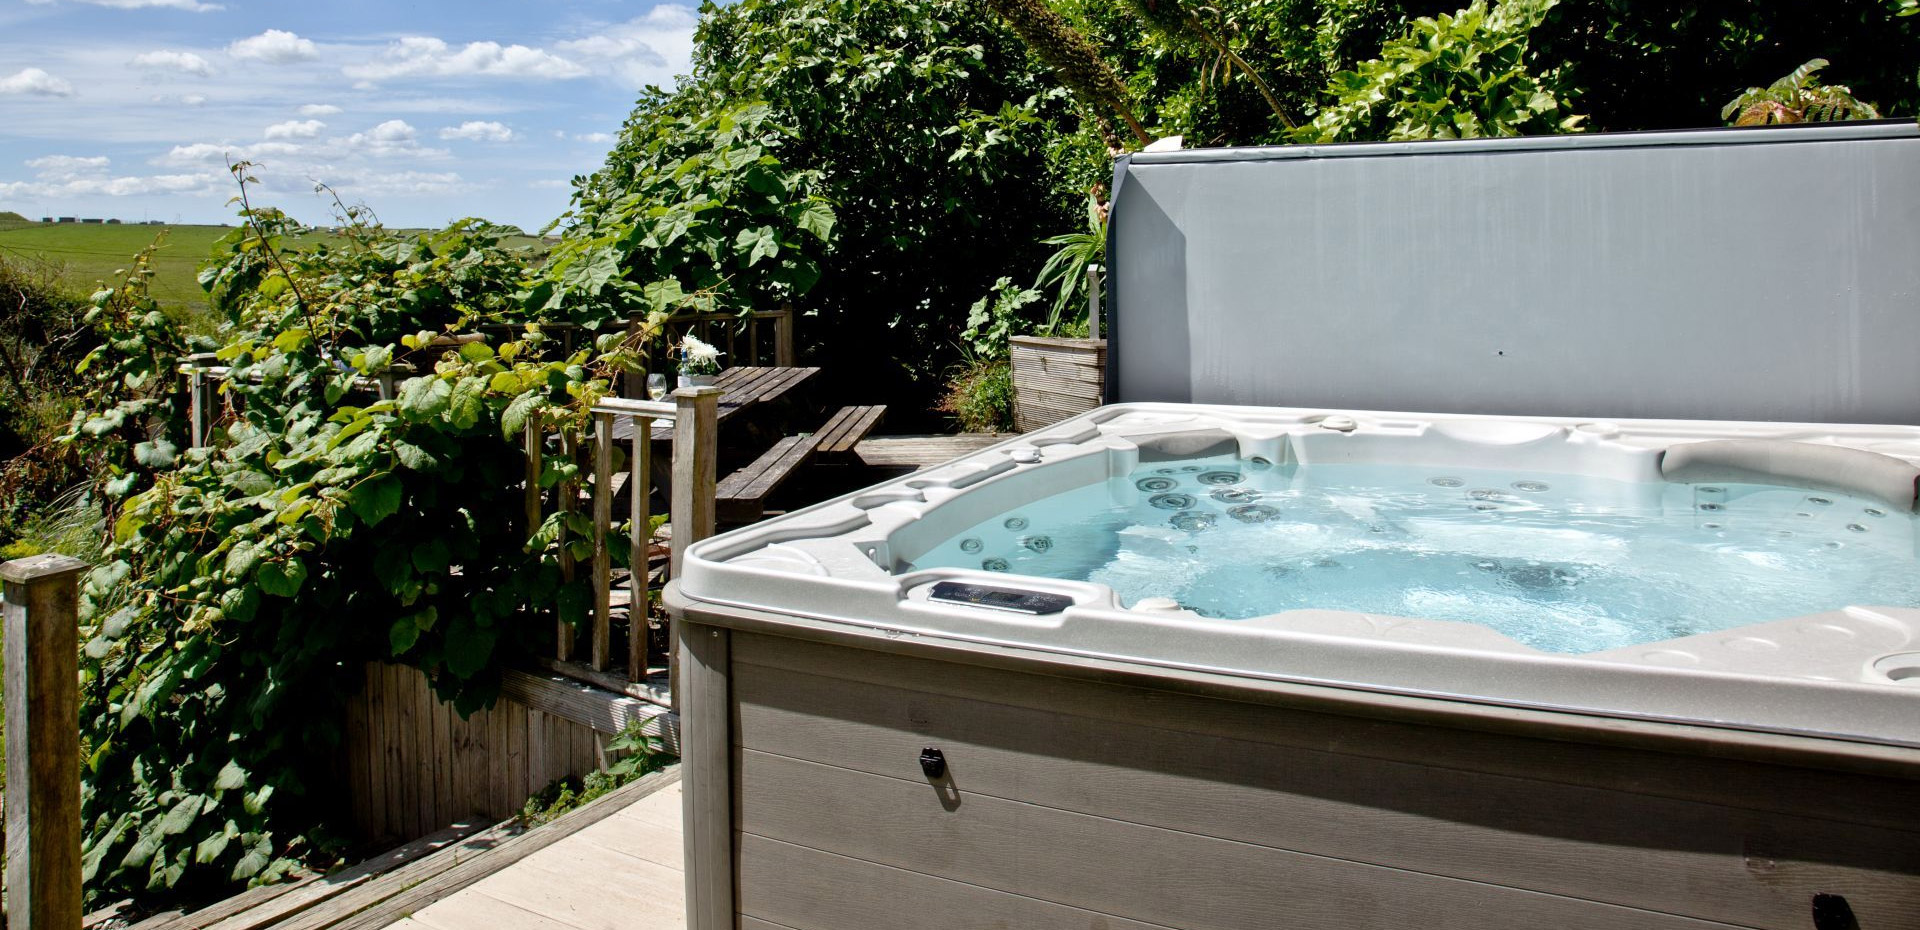 An open hot tub surronded by greenery, wooden decking and blue skies